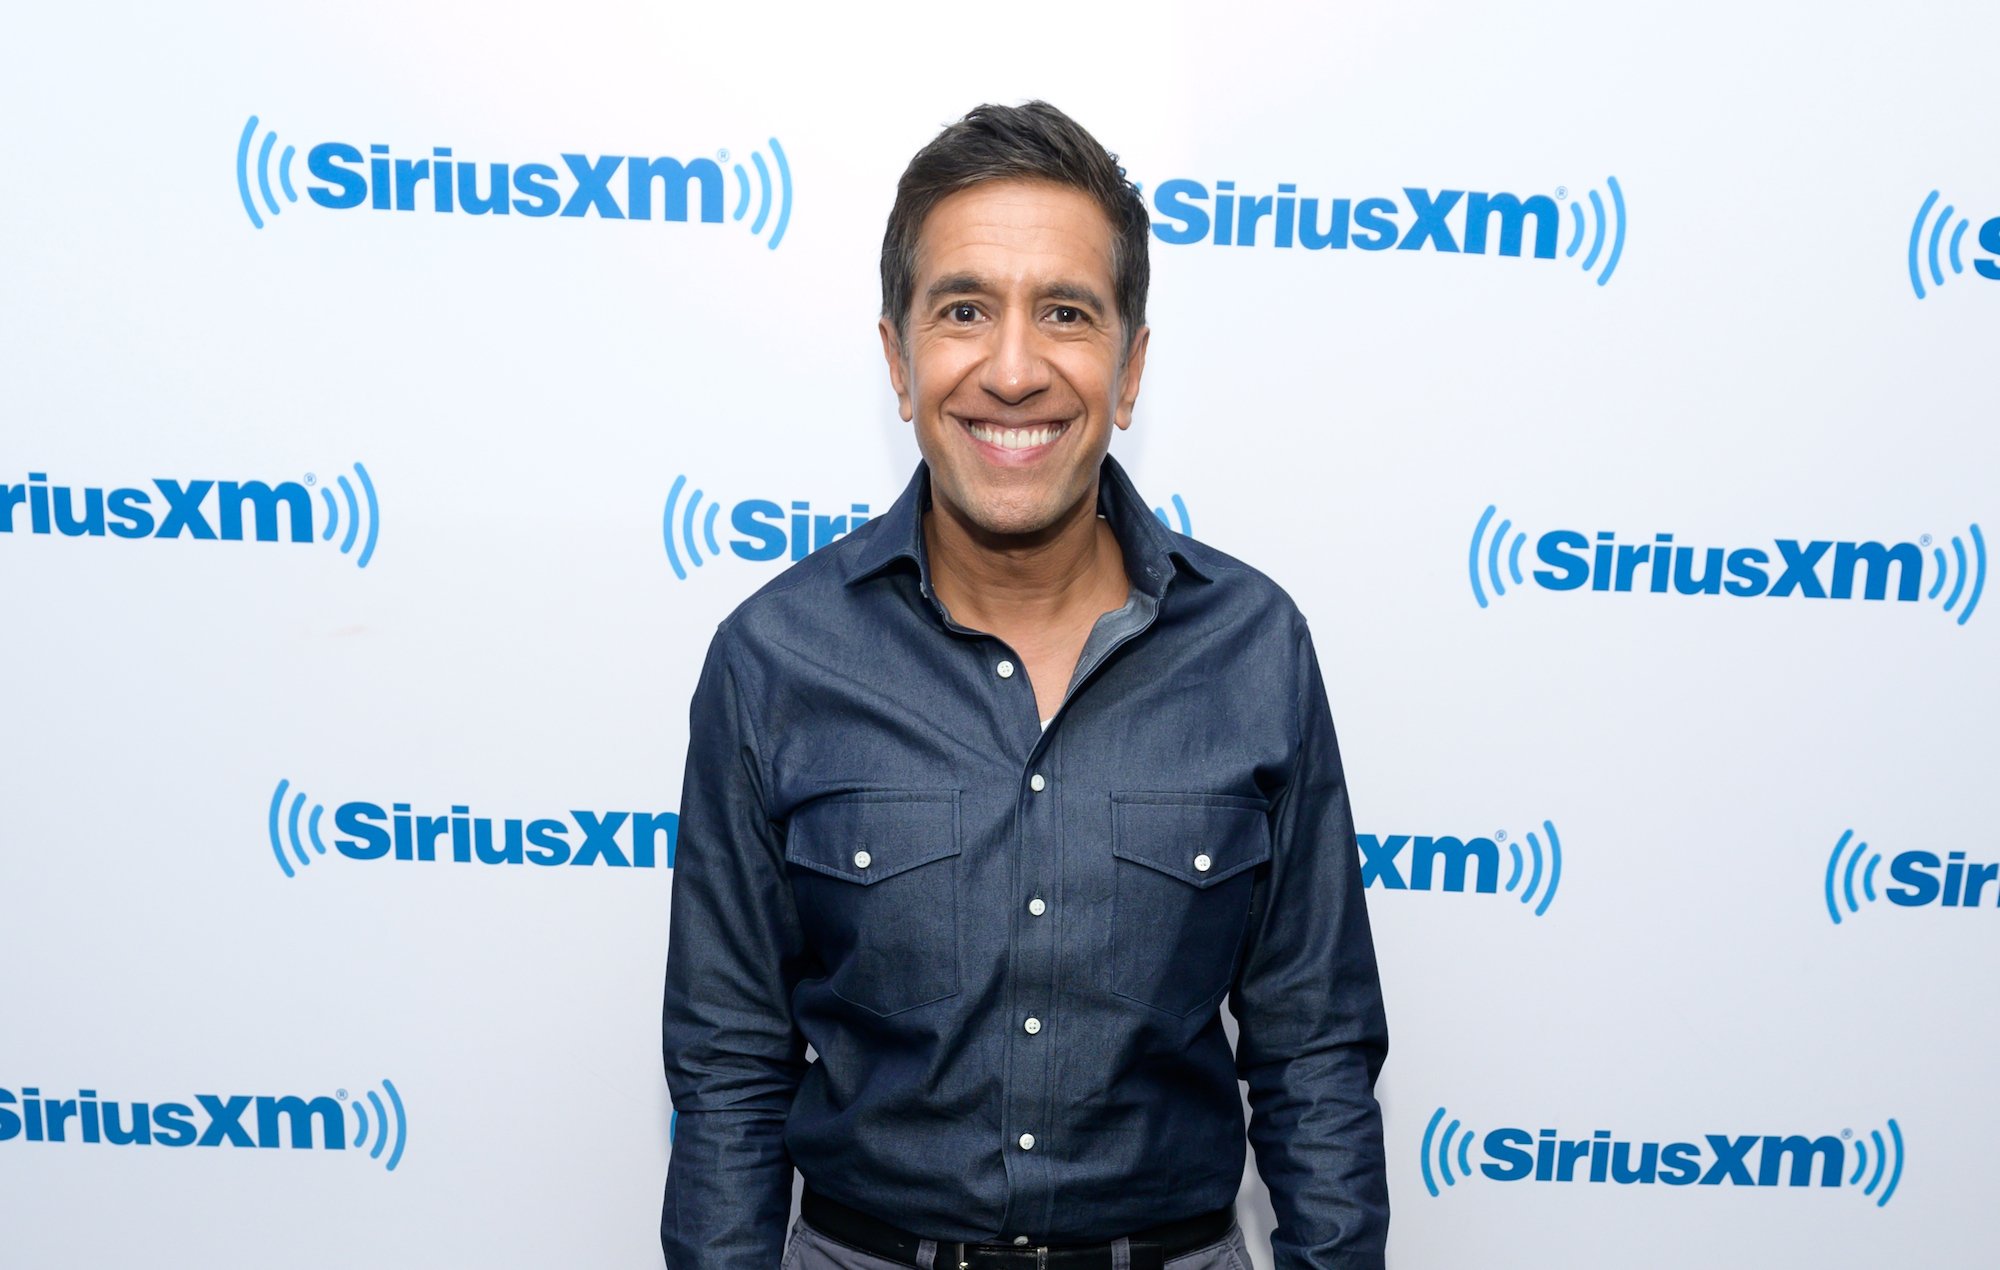 Dr. Sanjay Gupta smiling in front of a white background